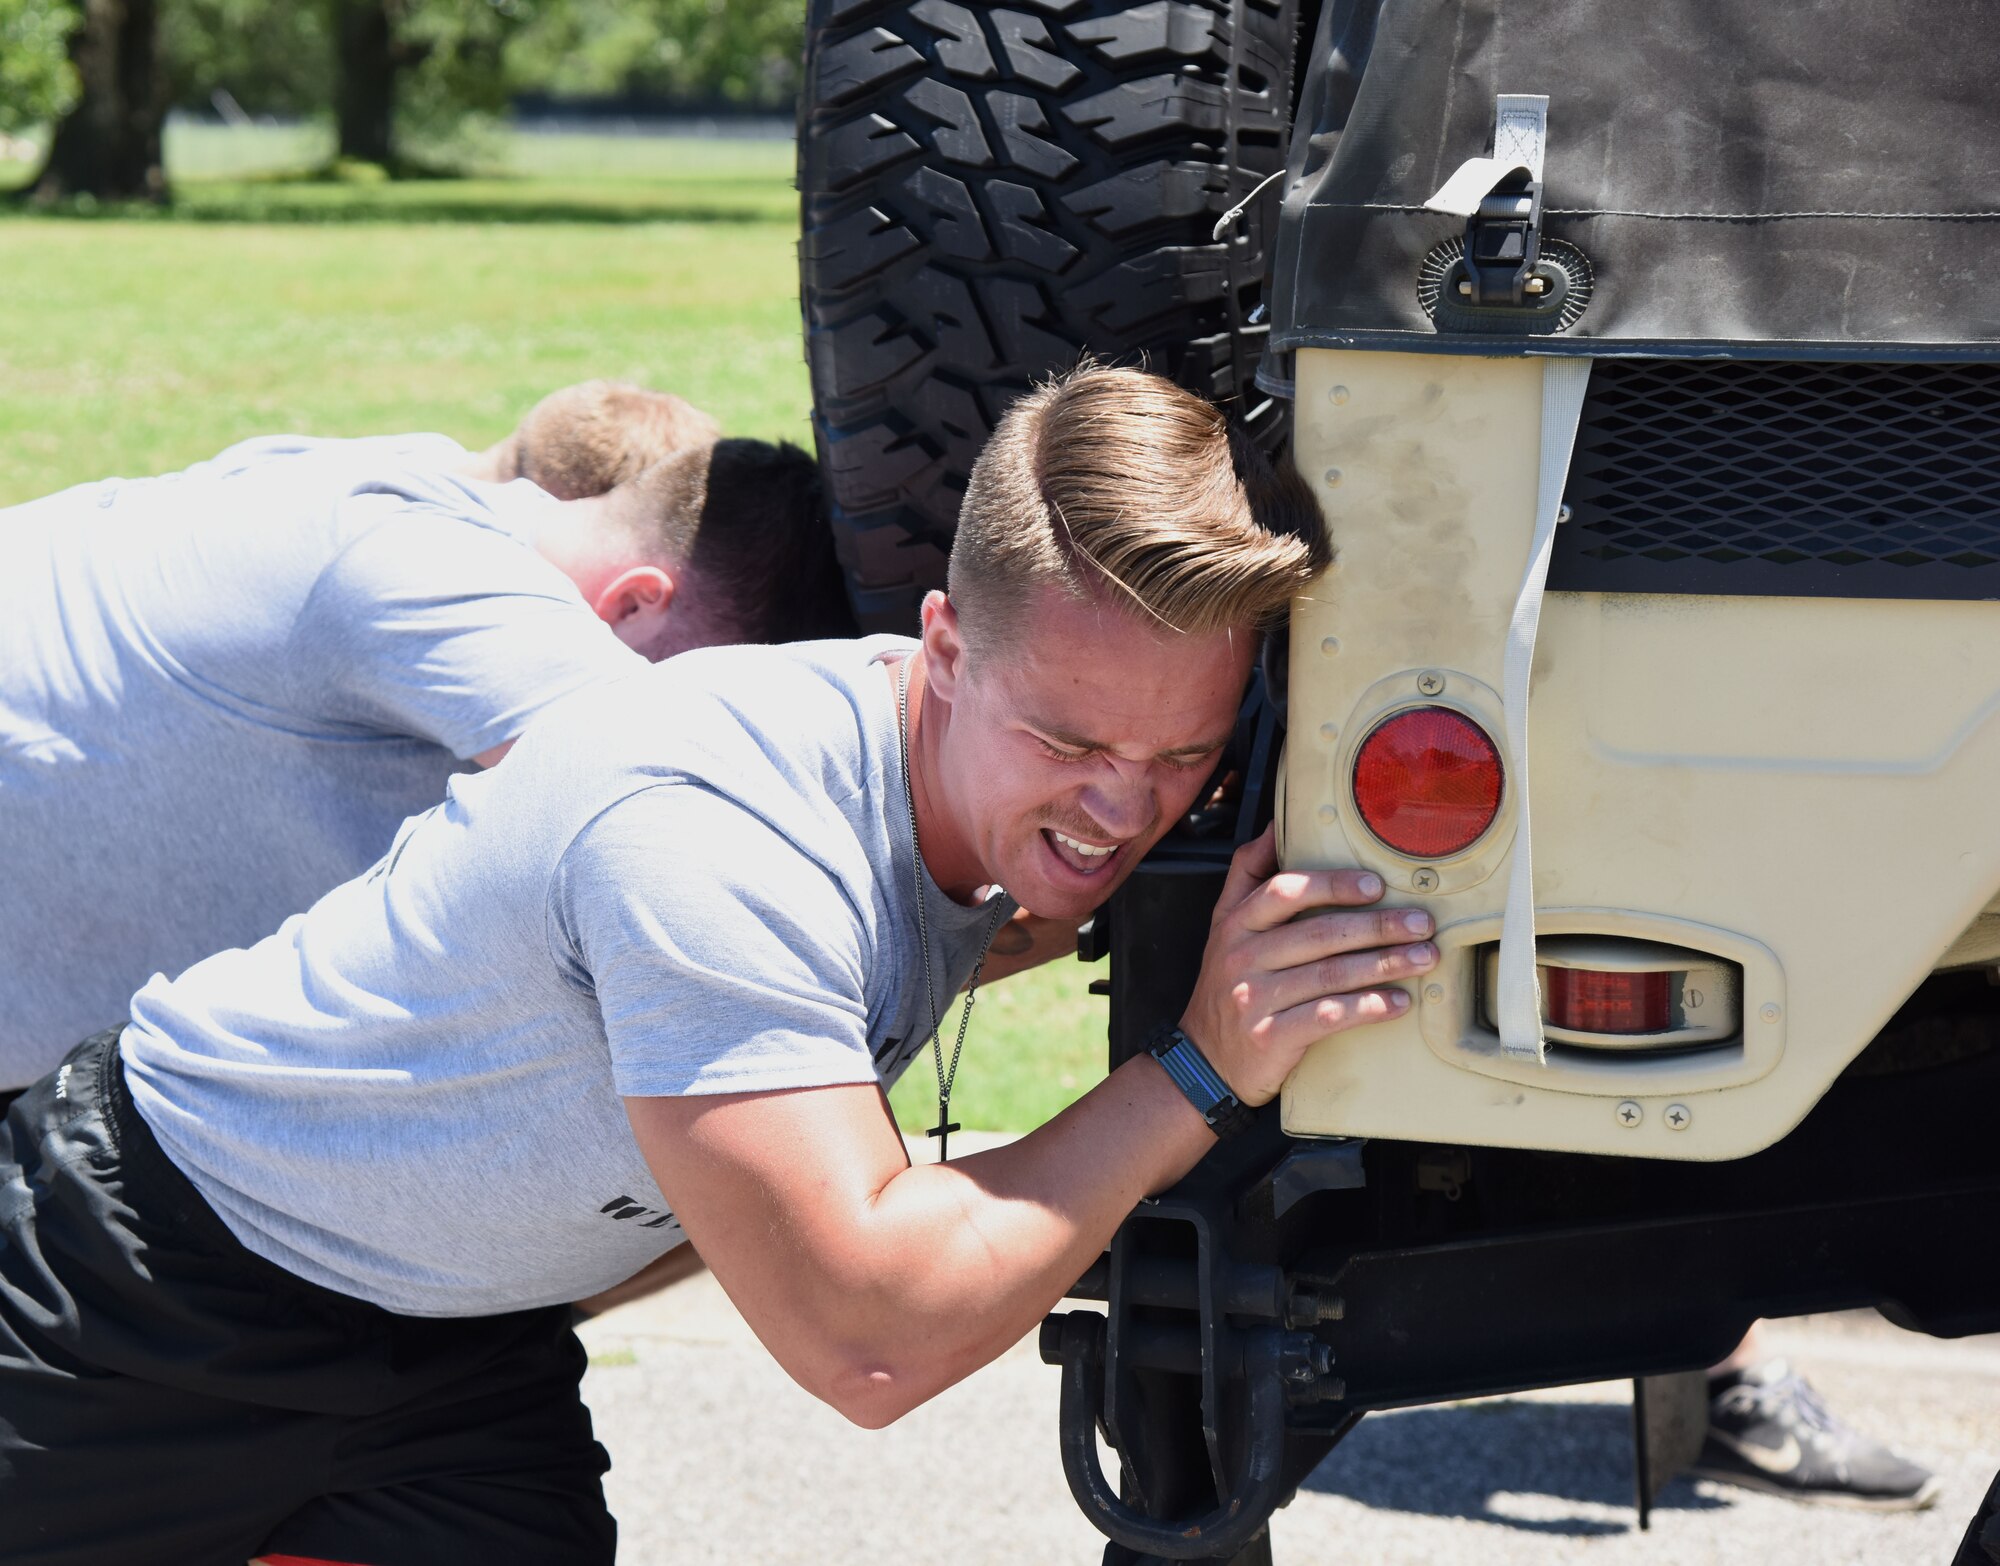 Staff Sgt. Caleb Gilliard, 81st Security Forces Squadron combat arms instructor, assists his team with pushing a Humvee during the 81st Security Forces Squadron obstacle course competition May 16, 2017, on Keesler Air Force Base, Miss. The competition was held during National Police Week, which recognizes the service of law enforcement men and women. (U.S. Air Force photo by Kemberly Groue)